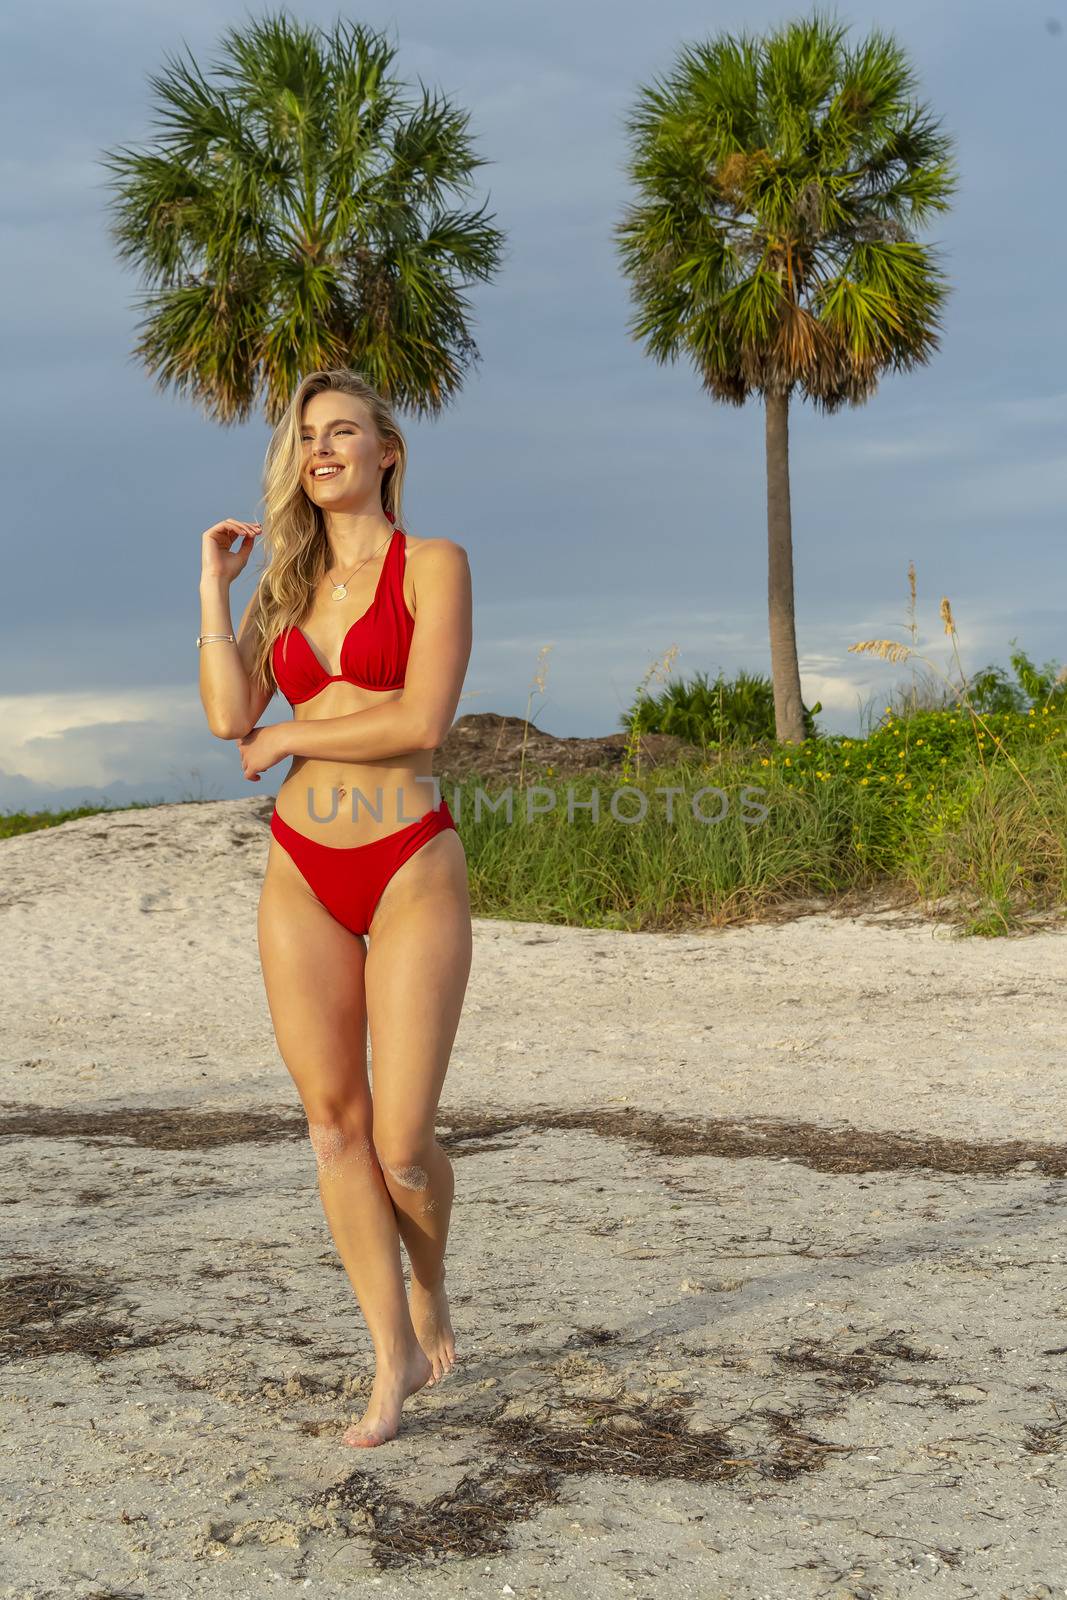 Lovely Blonde Bikini Model Posing Outdoors On A Caribbean Beach by actionsports